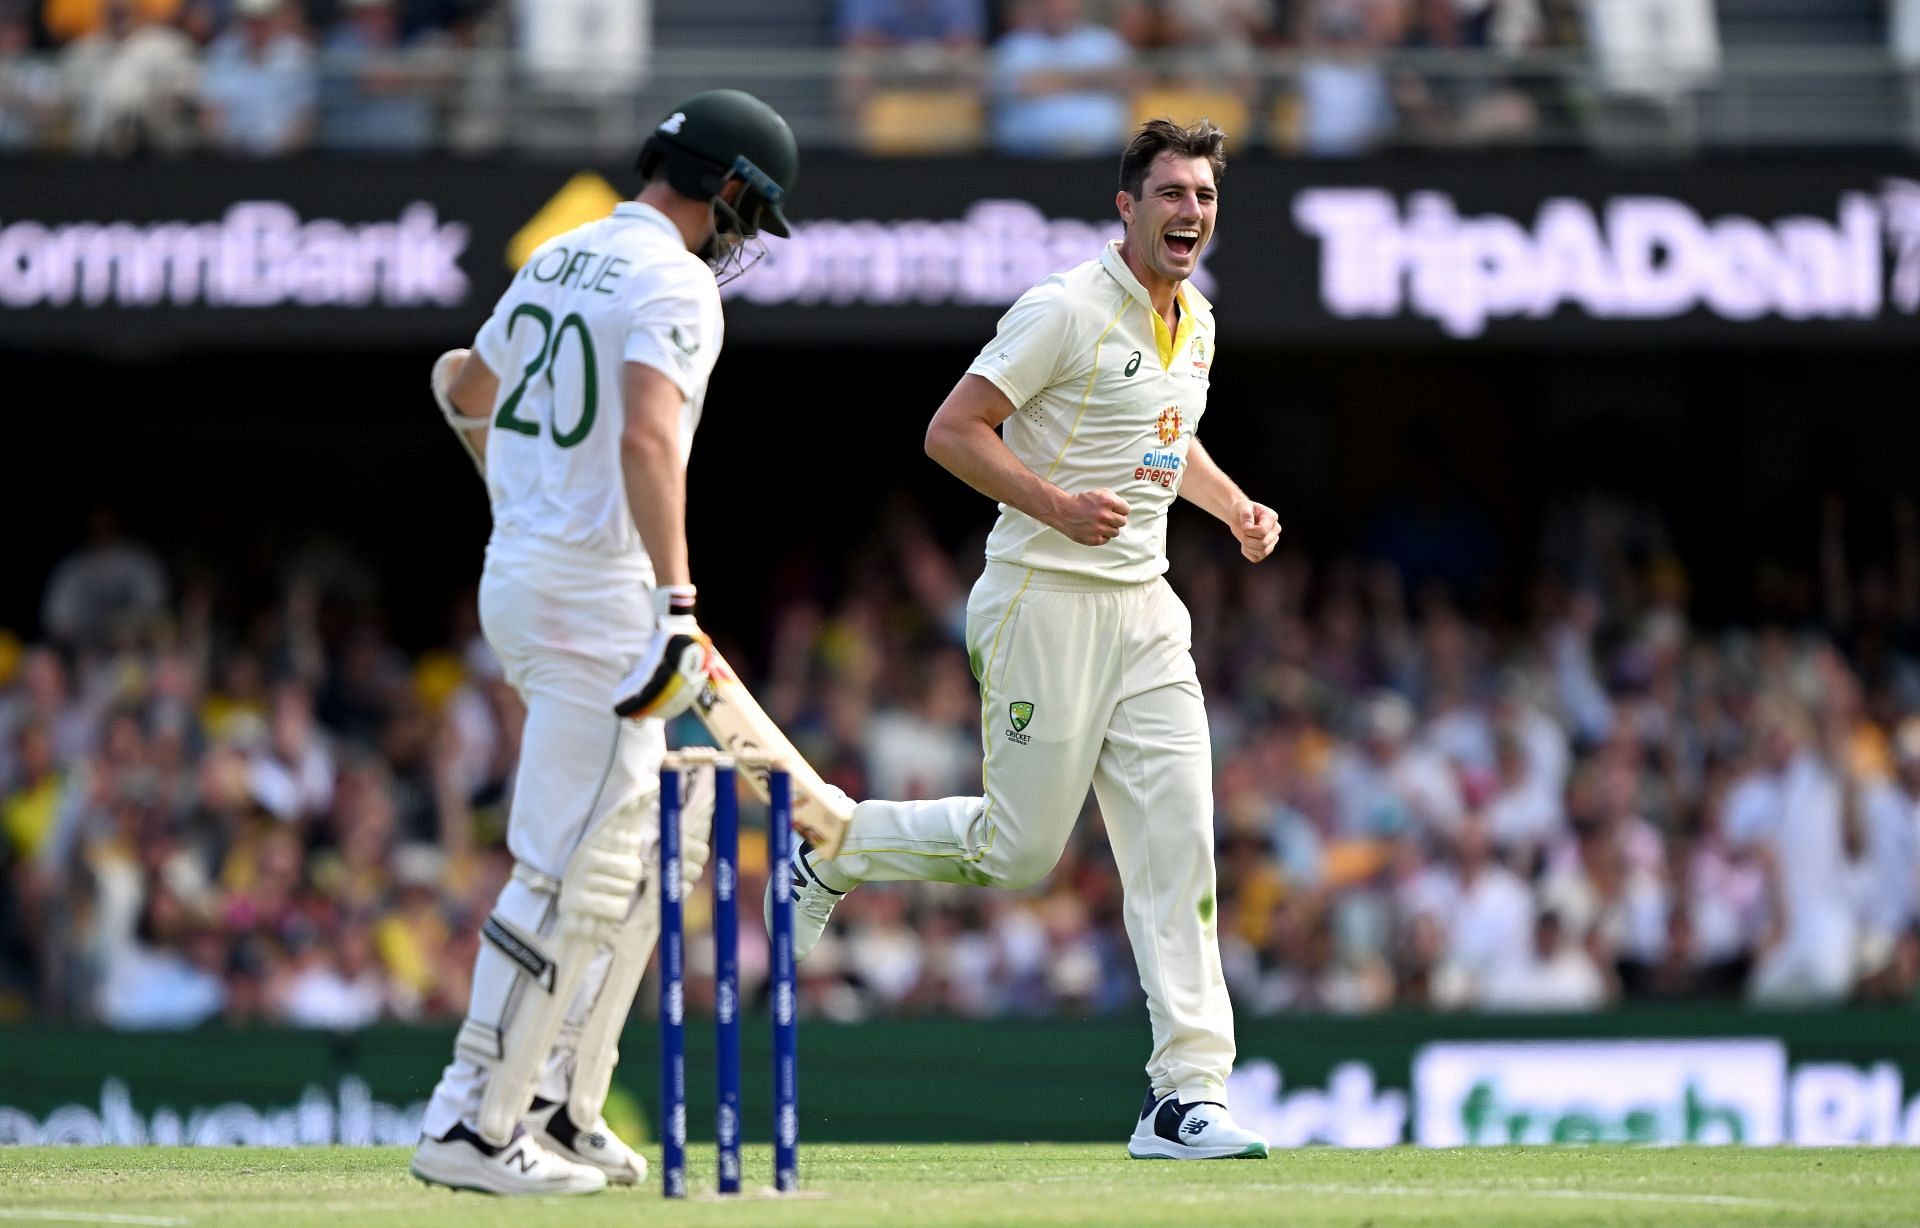 Pat Cummins picked up a fifer in the second innings. (Credits: Getty)